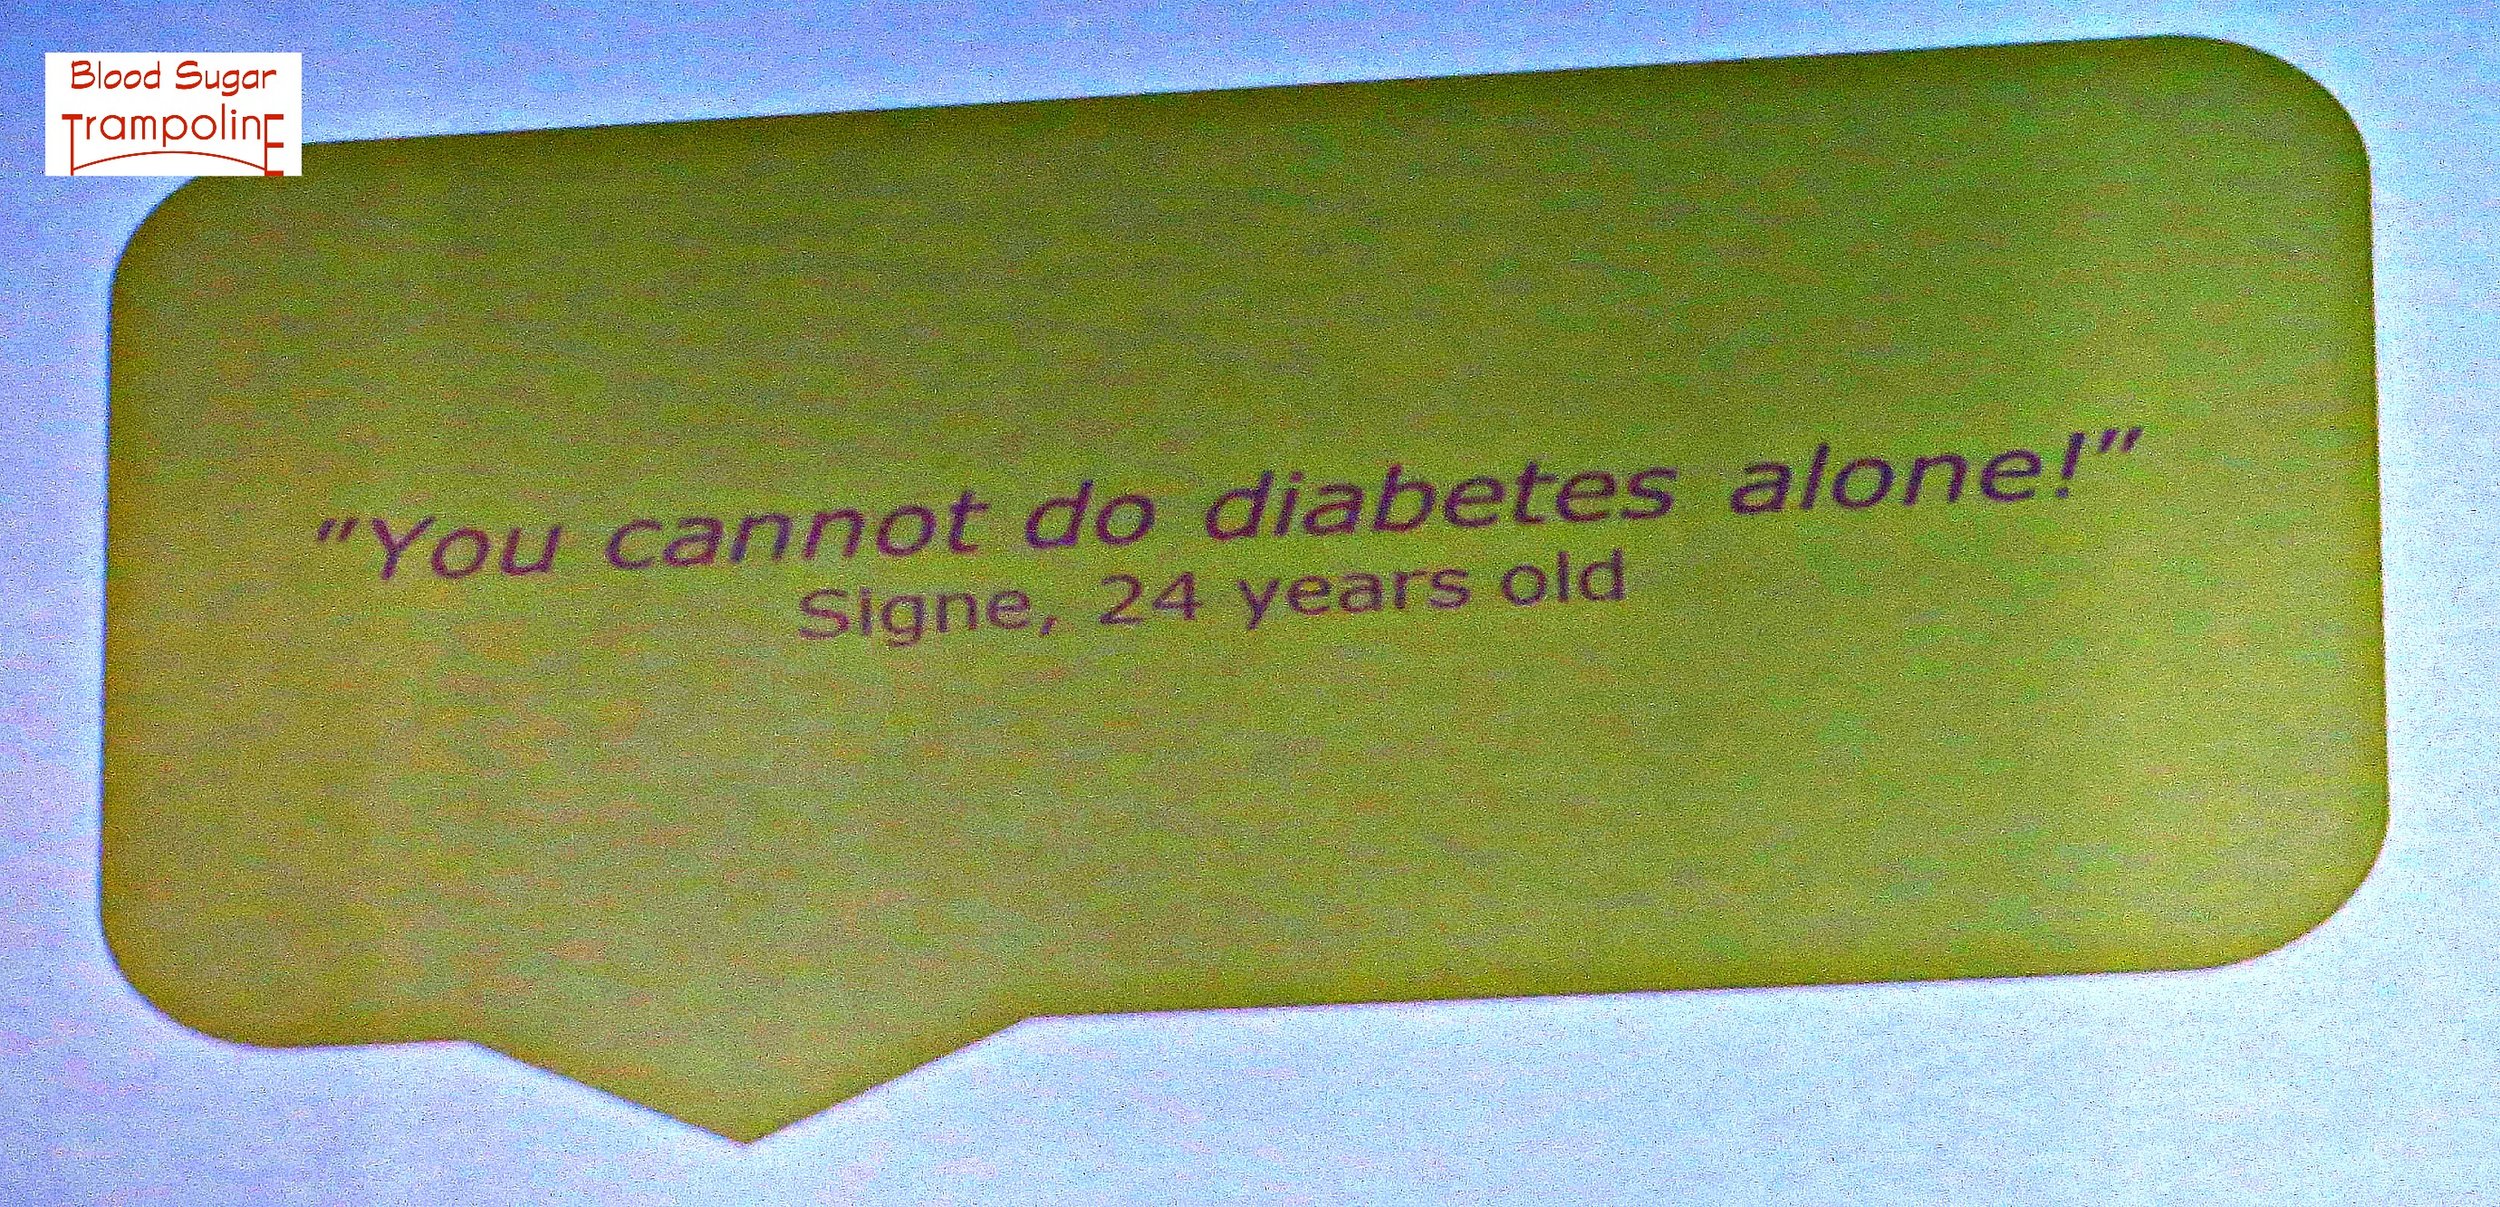 You can't do diabetes alone